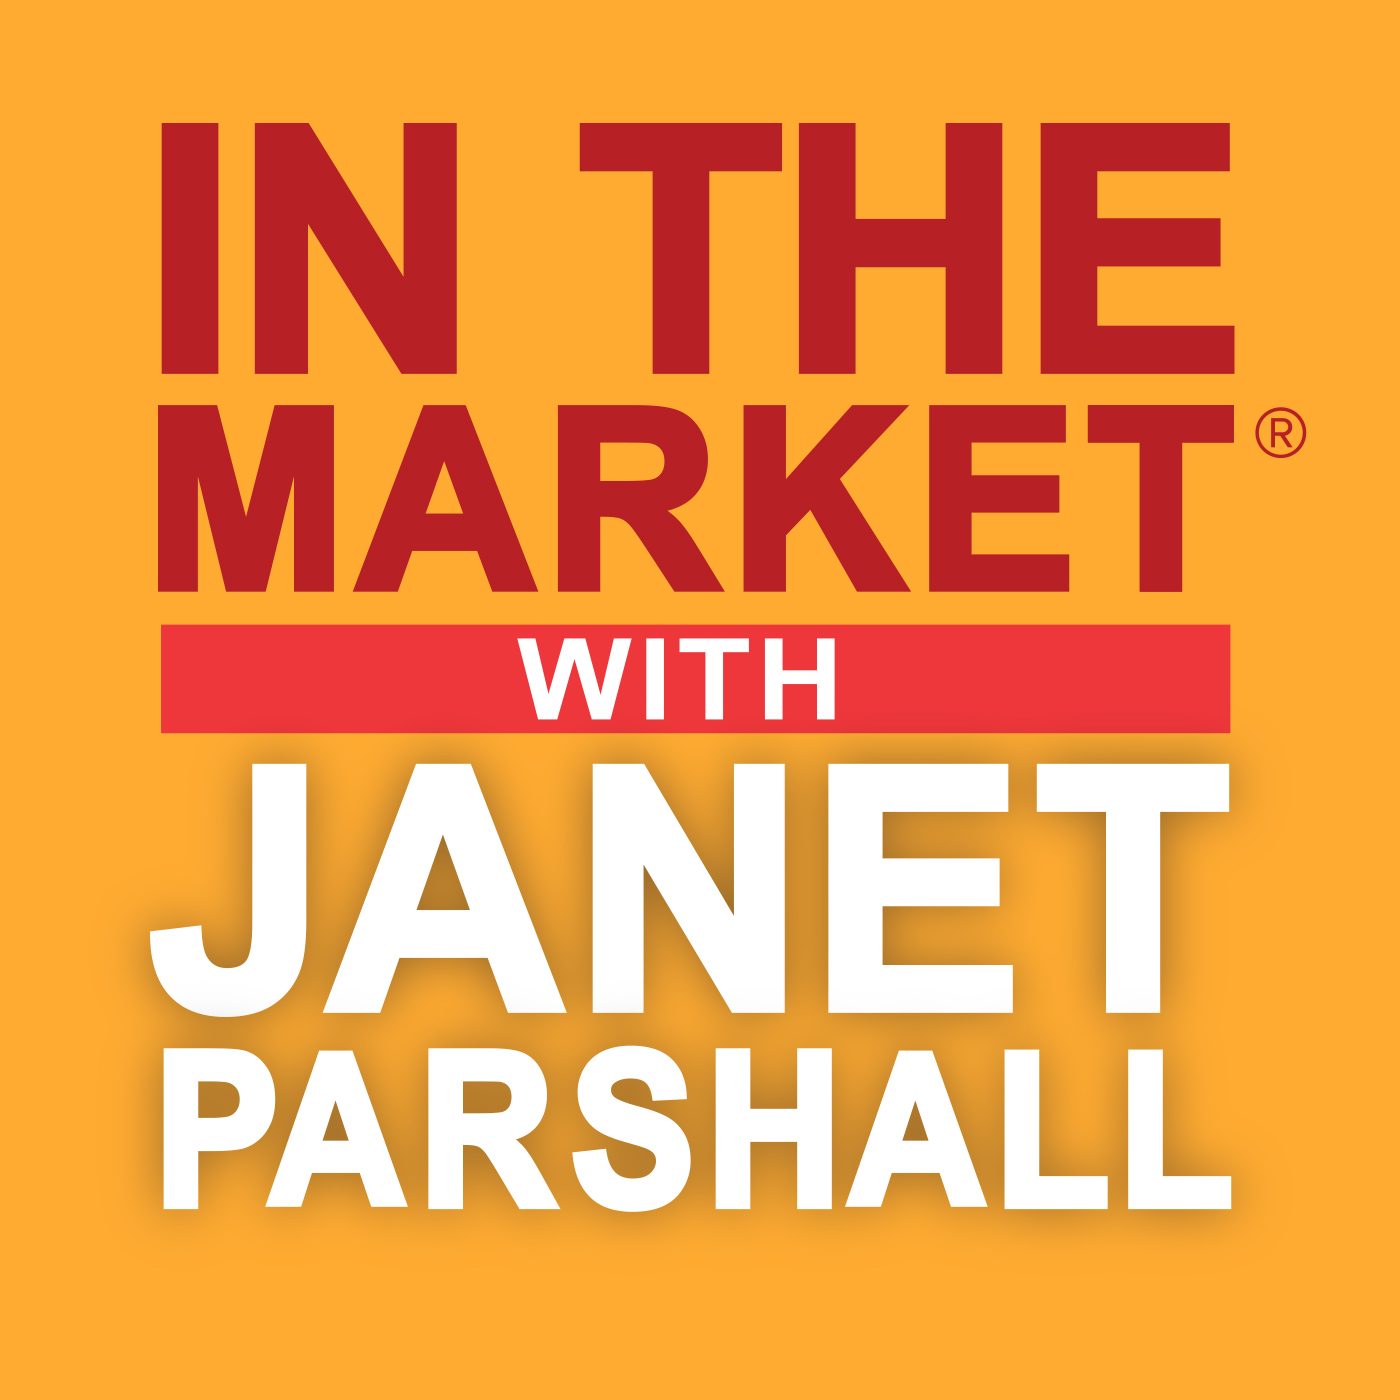 Best of In The Market with Janet Parshall: Do You Have A Question?